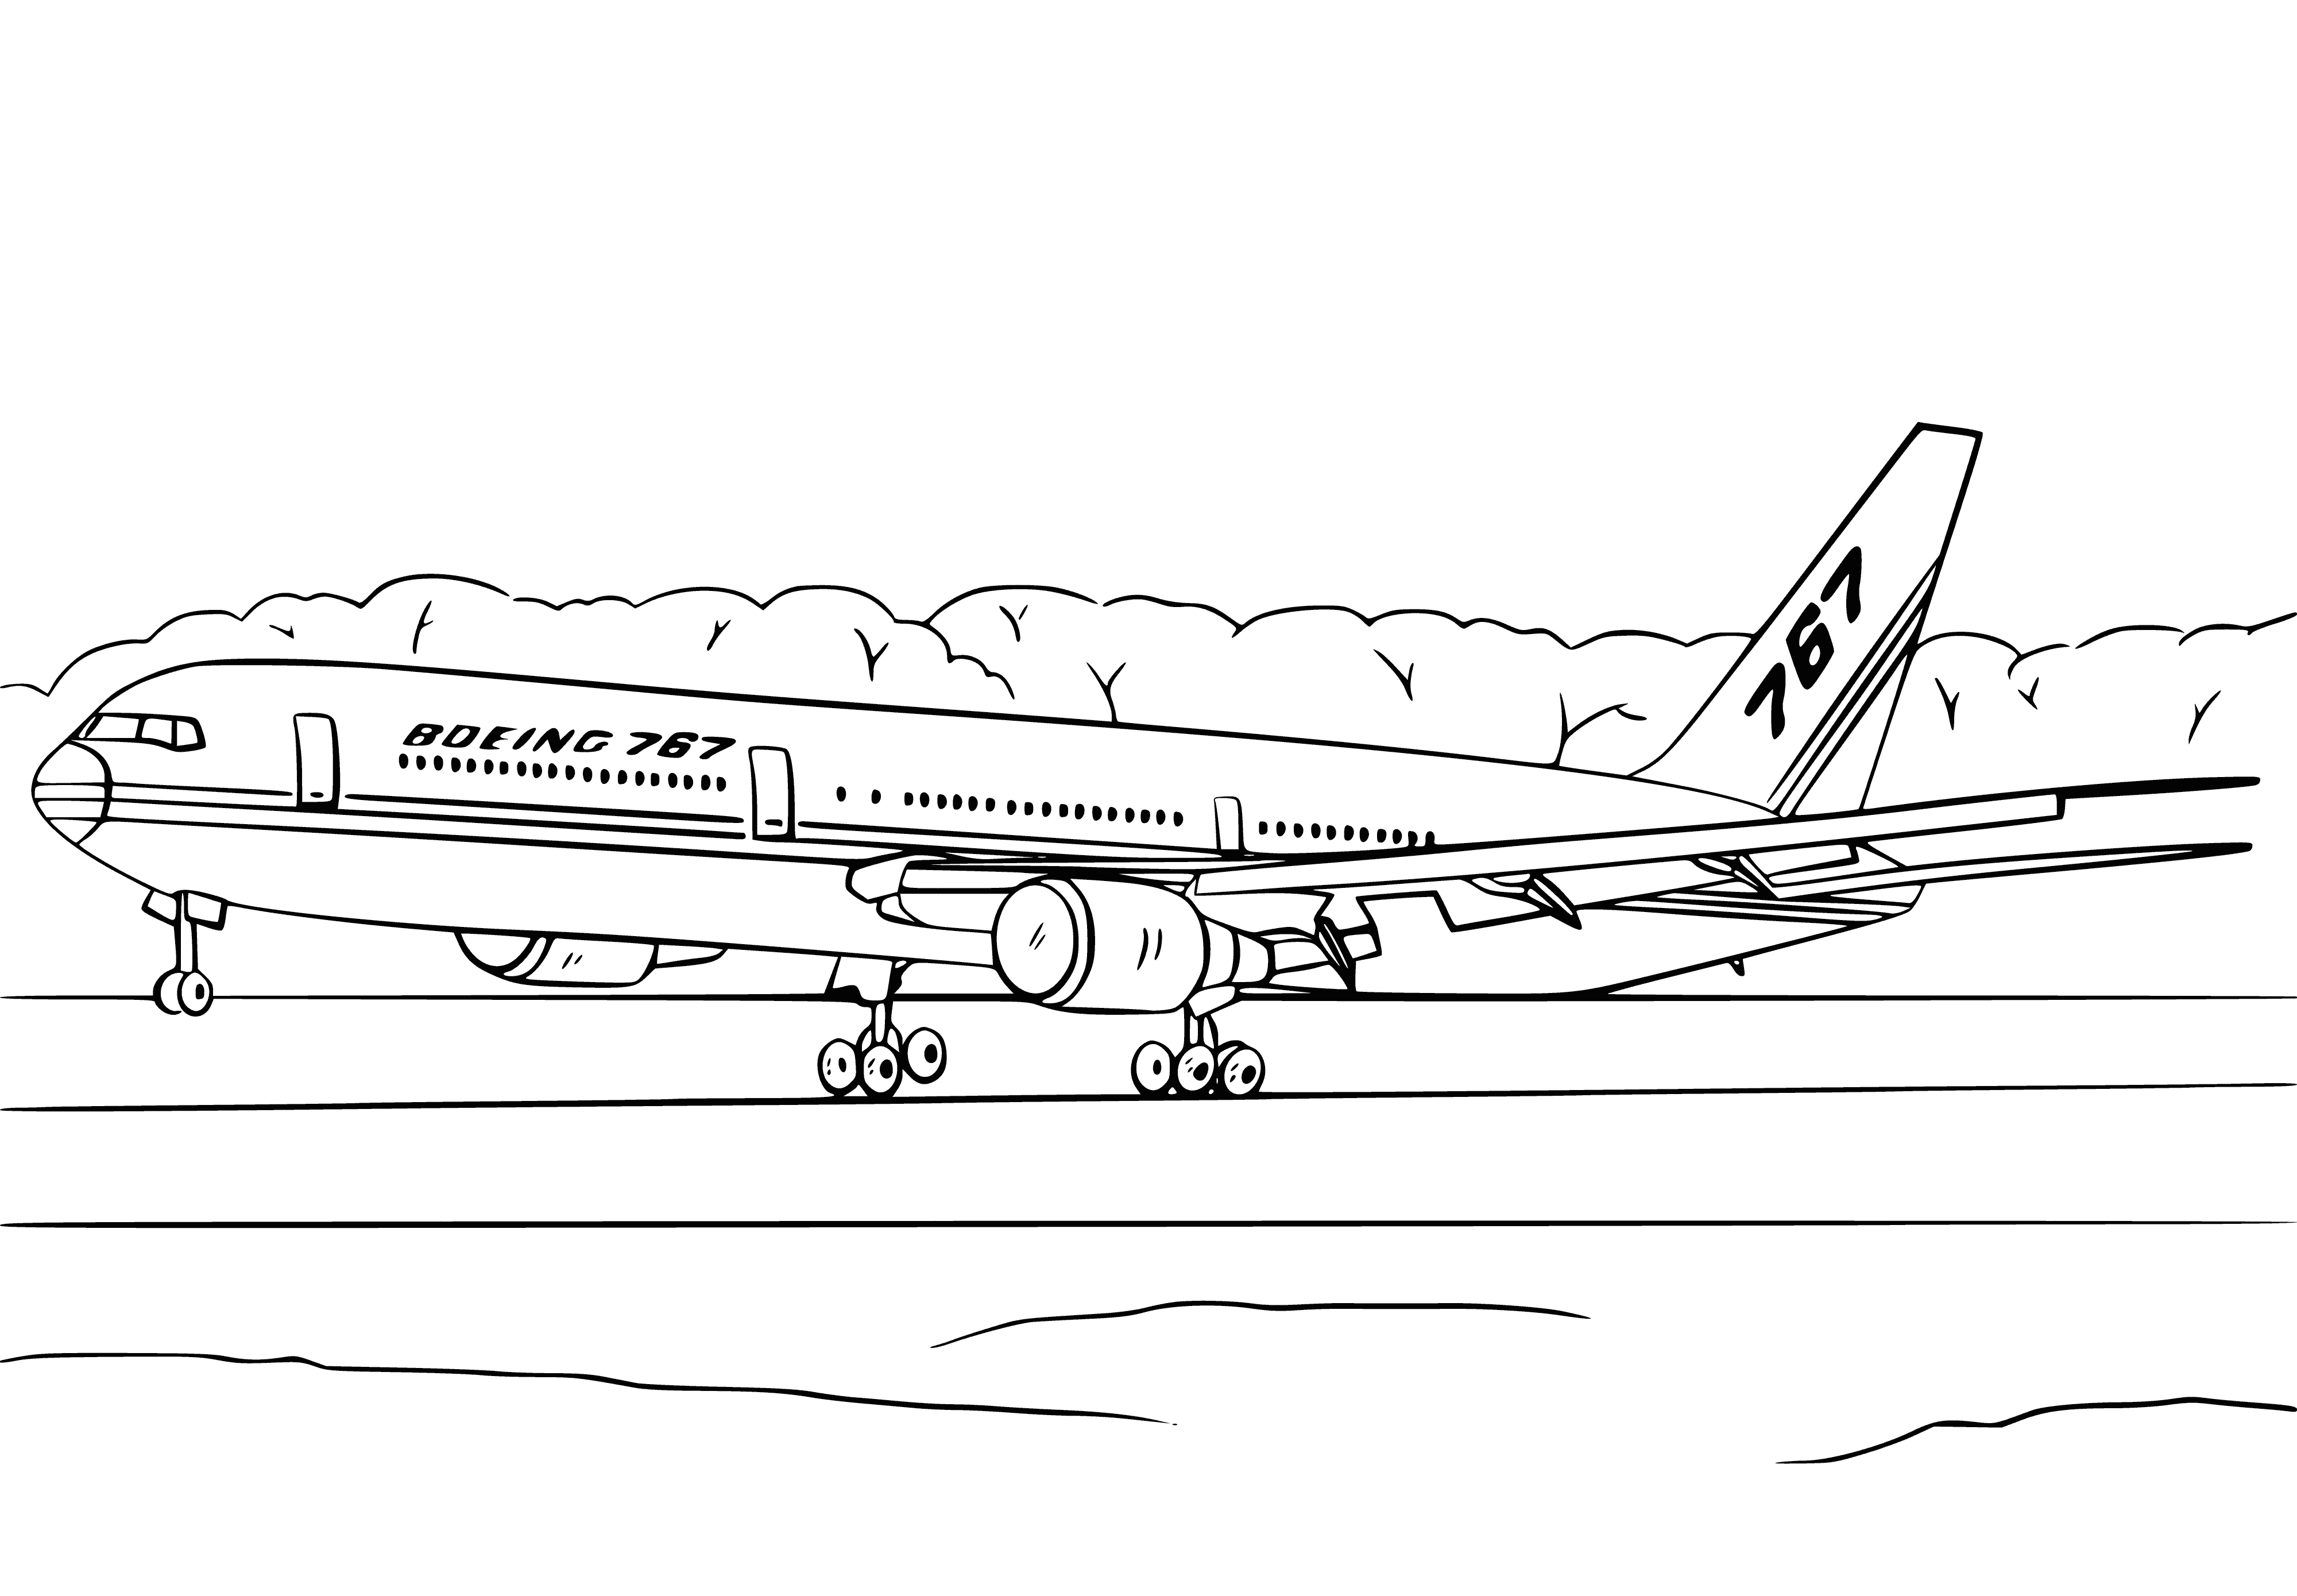 coloring page: Plane on runway: Boeing 767, white w/ blue & red stripes near tail, blue & white Boeing logo, 2 rows of windows, engine near tail.